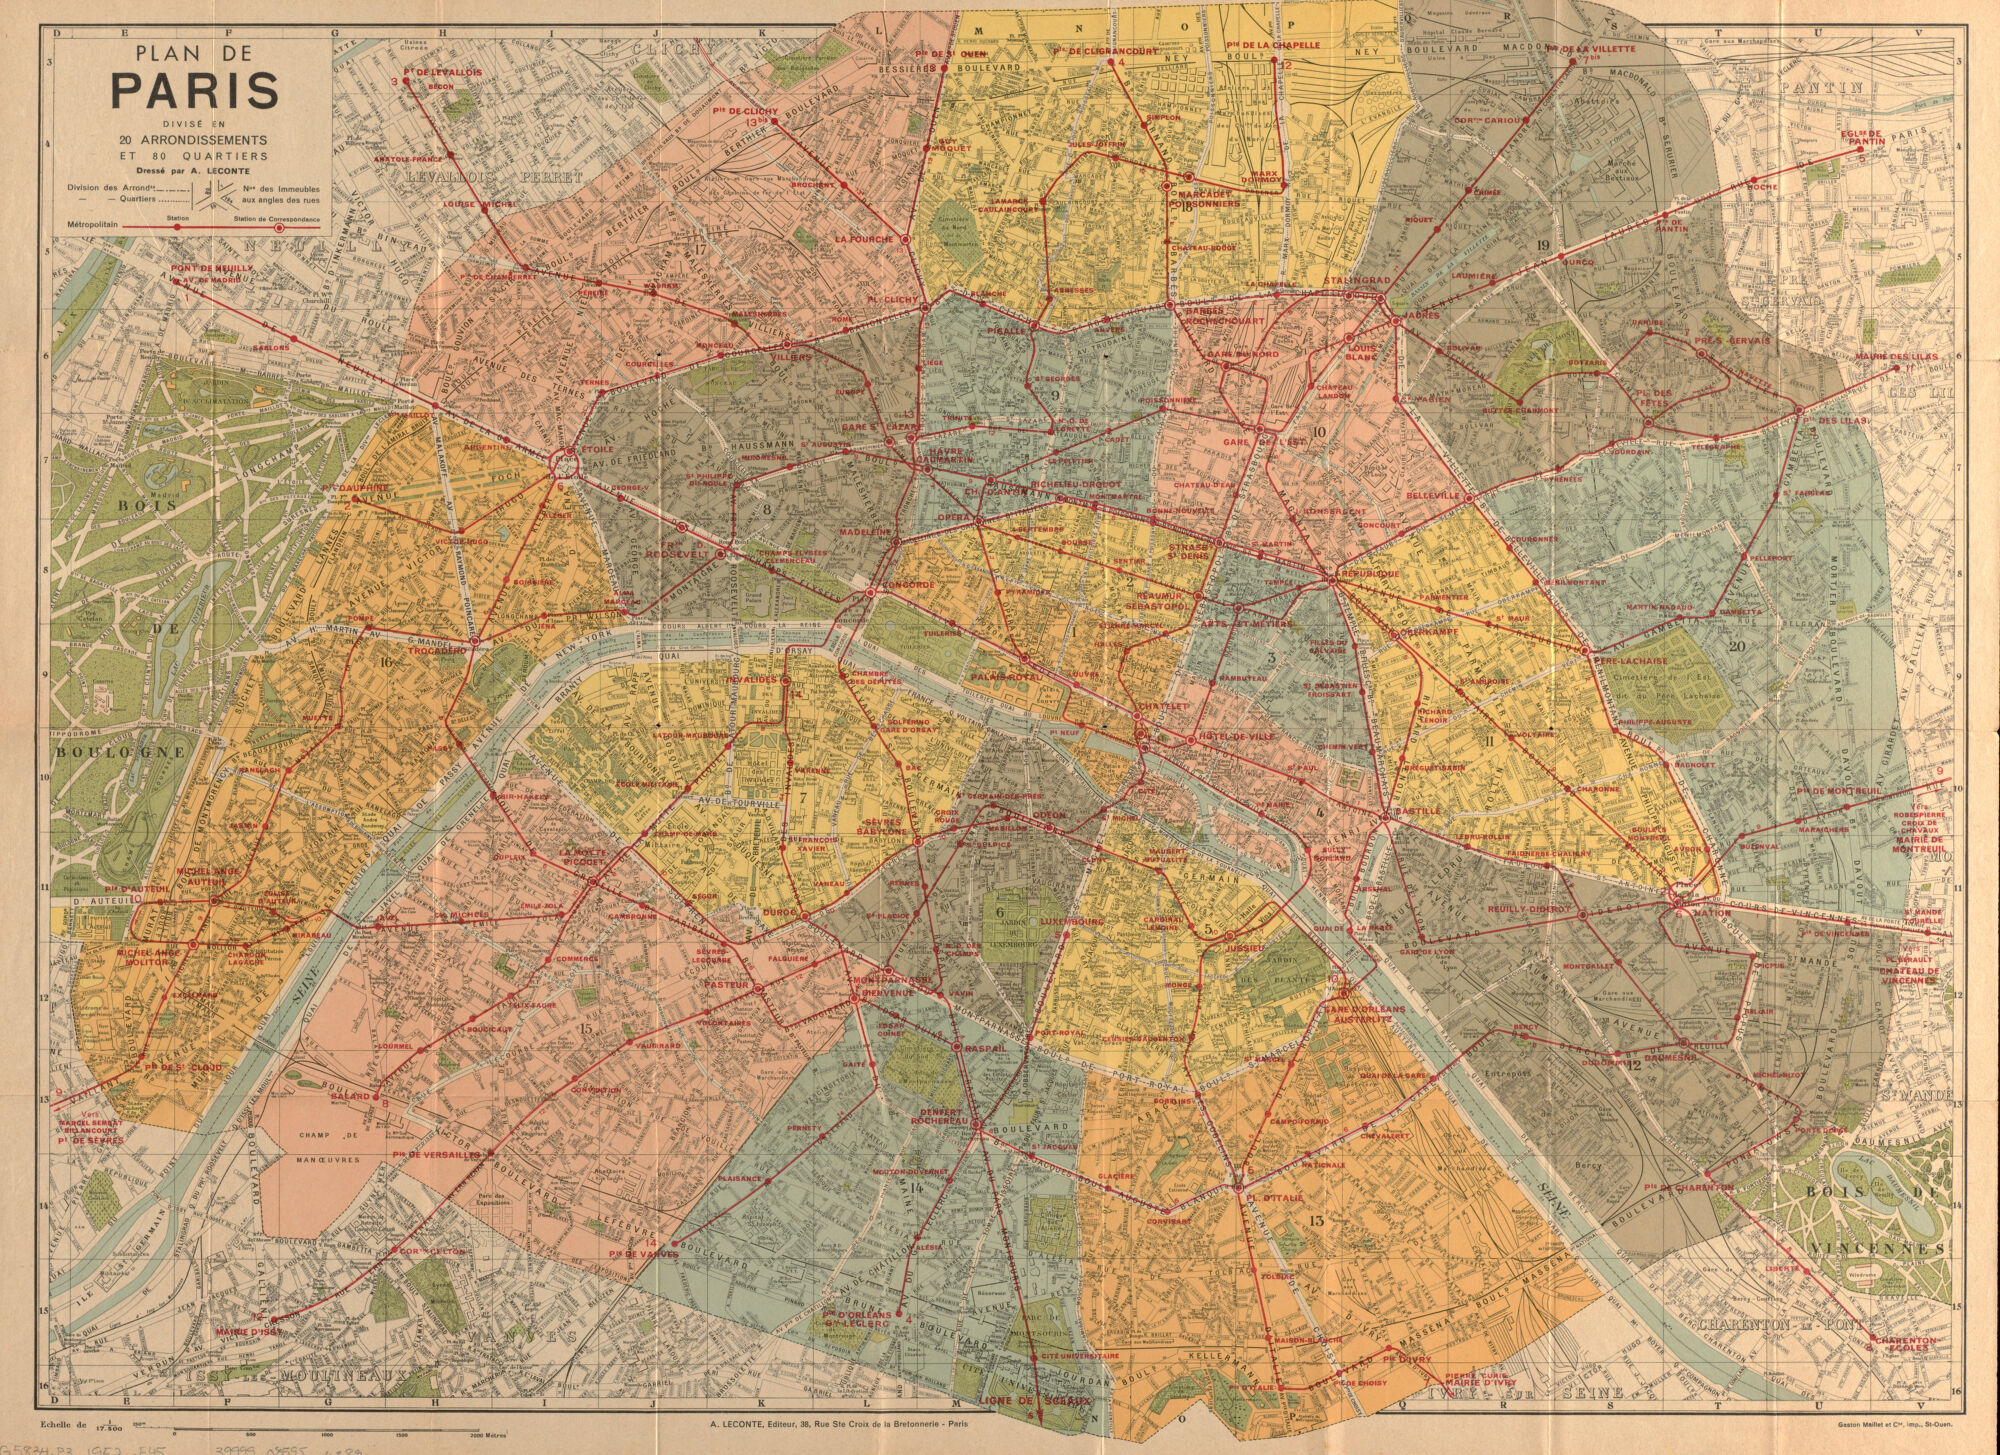 A mid-twentieth century map of Paris and the subway system.